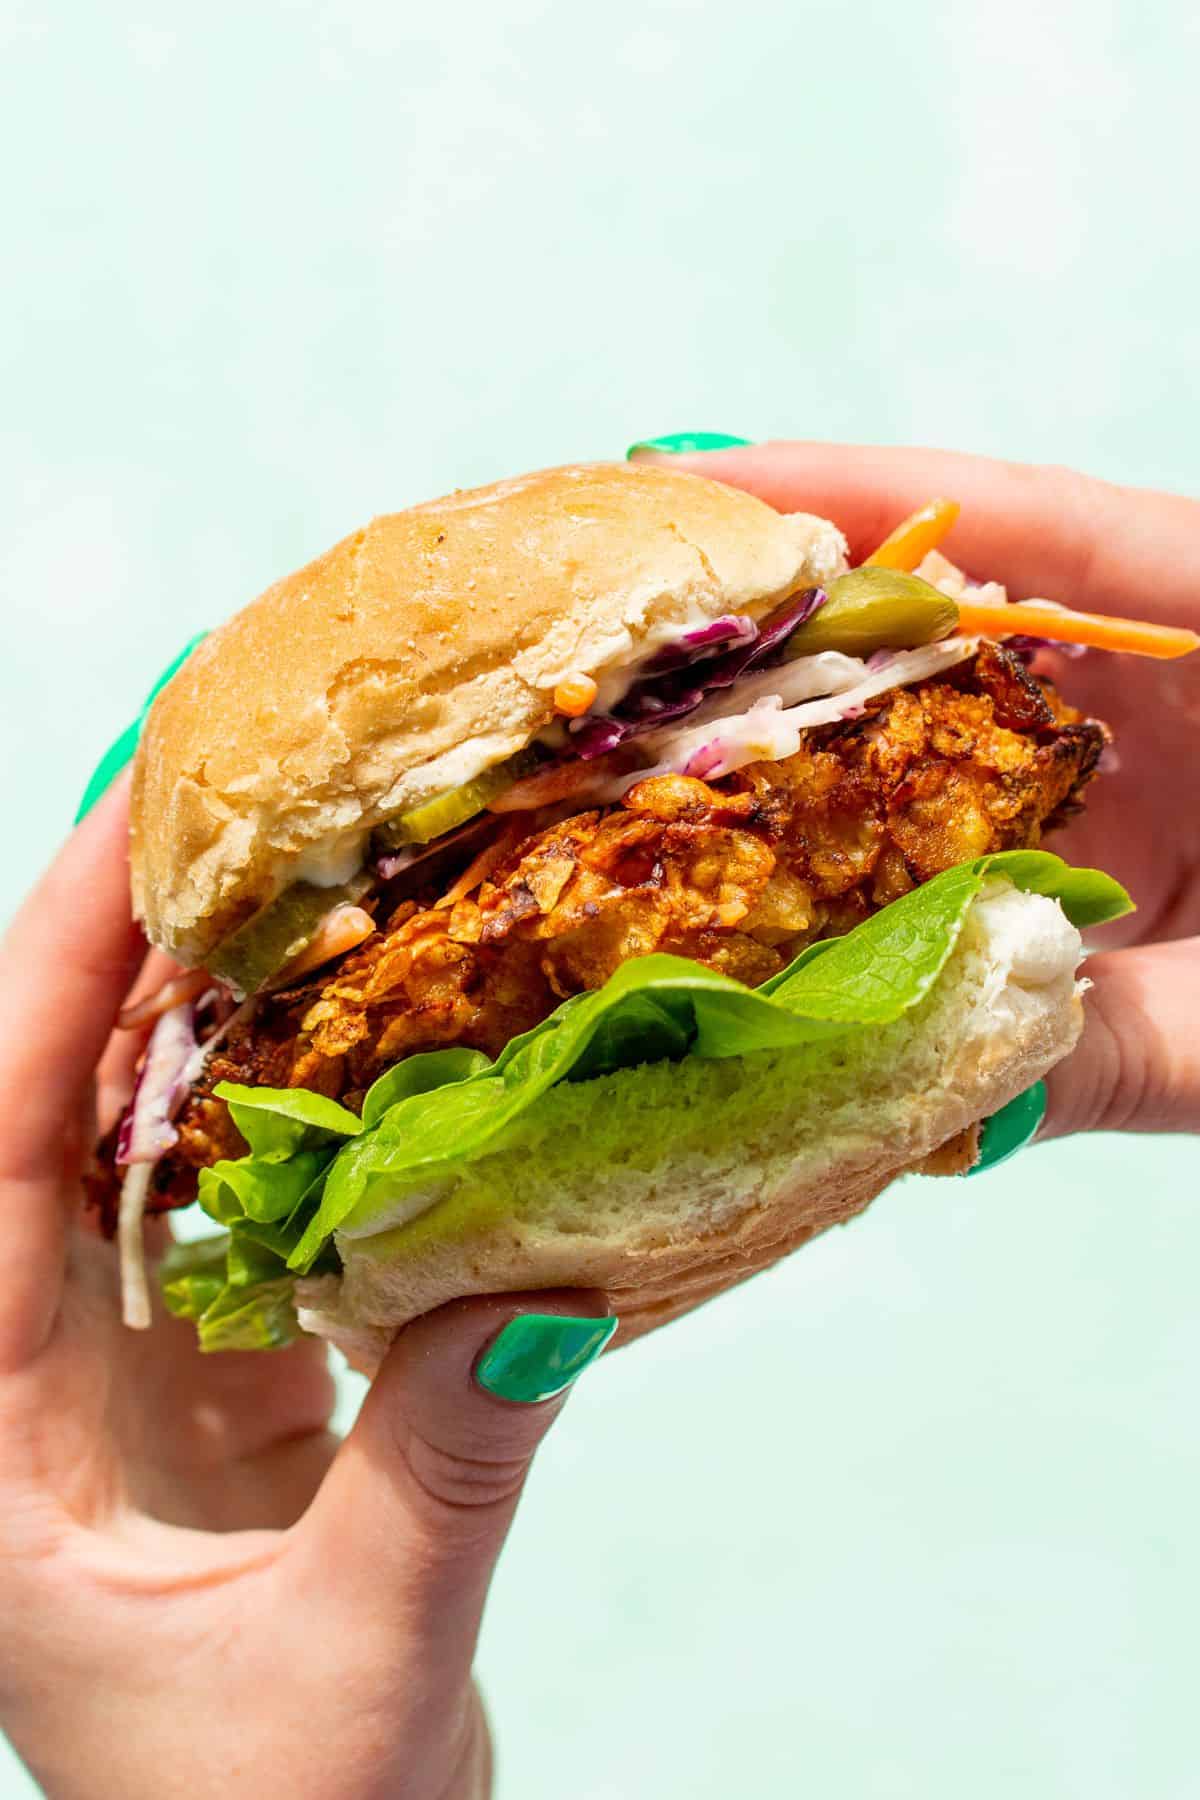 Spicy chicken sandwich side shot with hands holding the bun filled with lettuce, large piece of chicken and coleslaw.